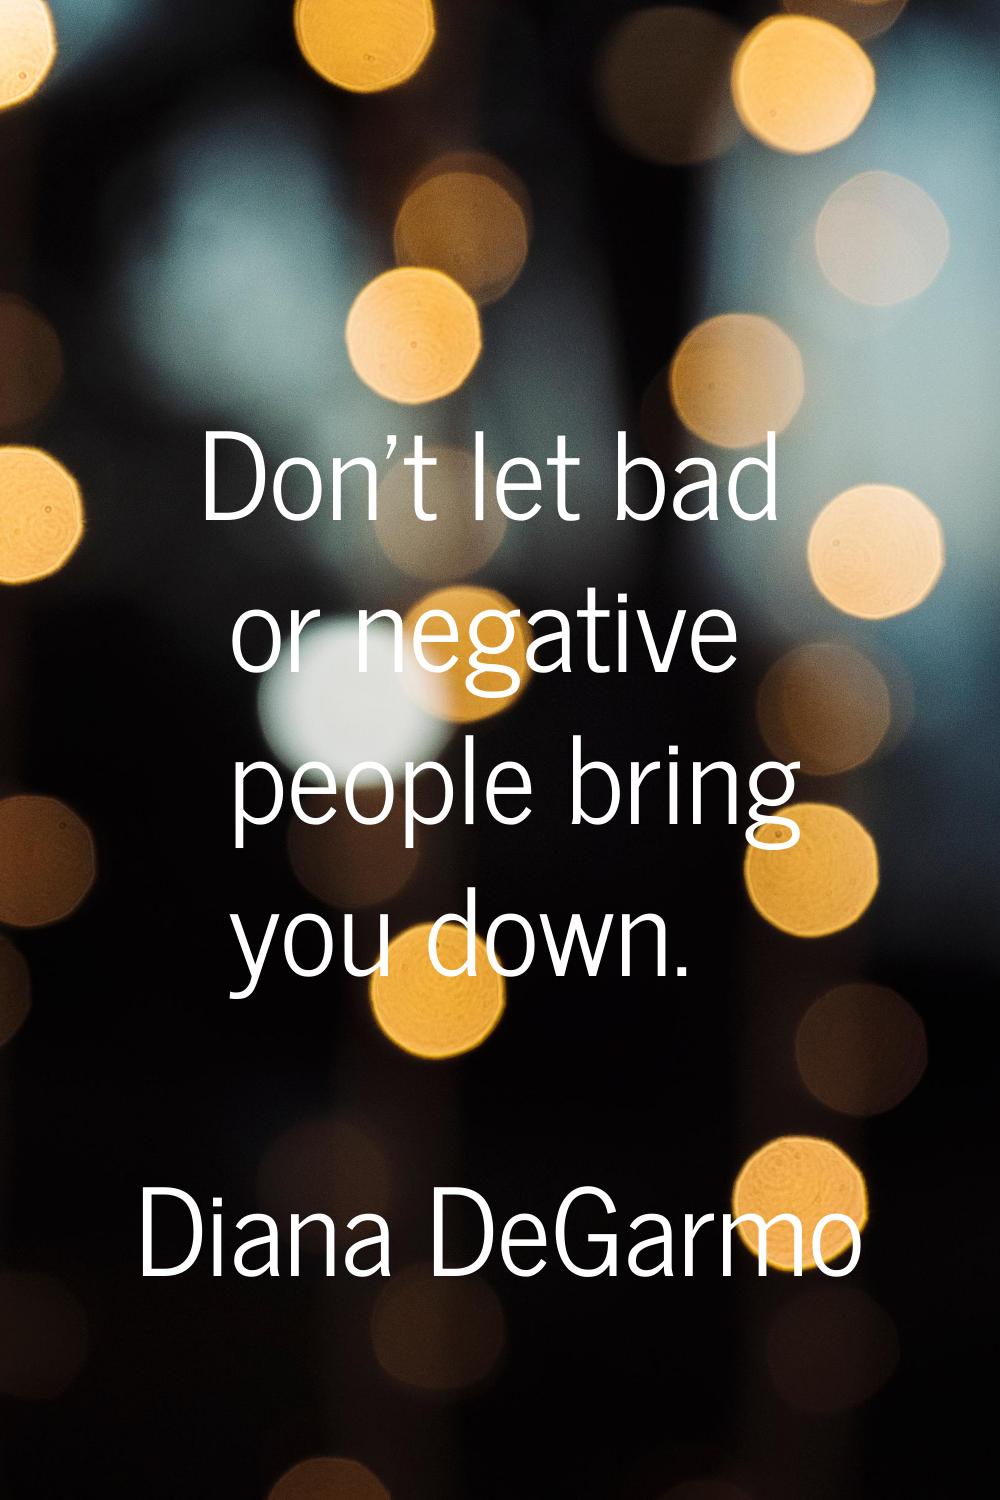 Don't let bad or negative people bring you down.